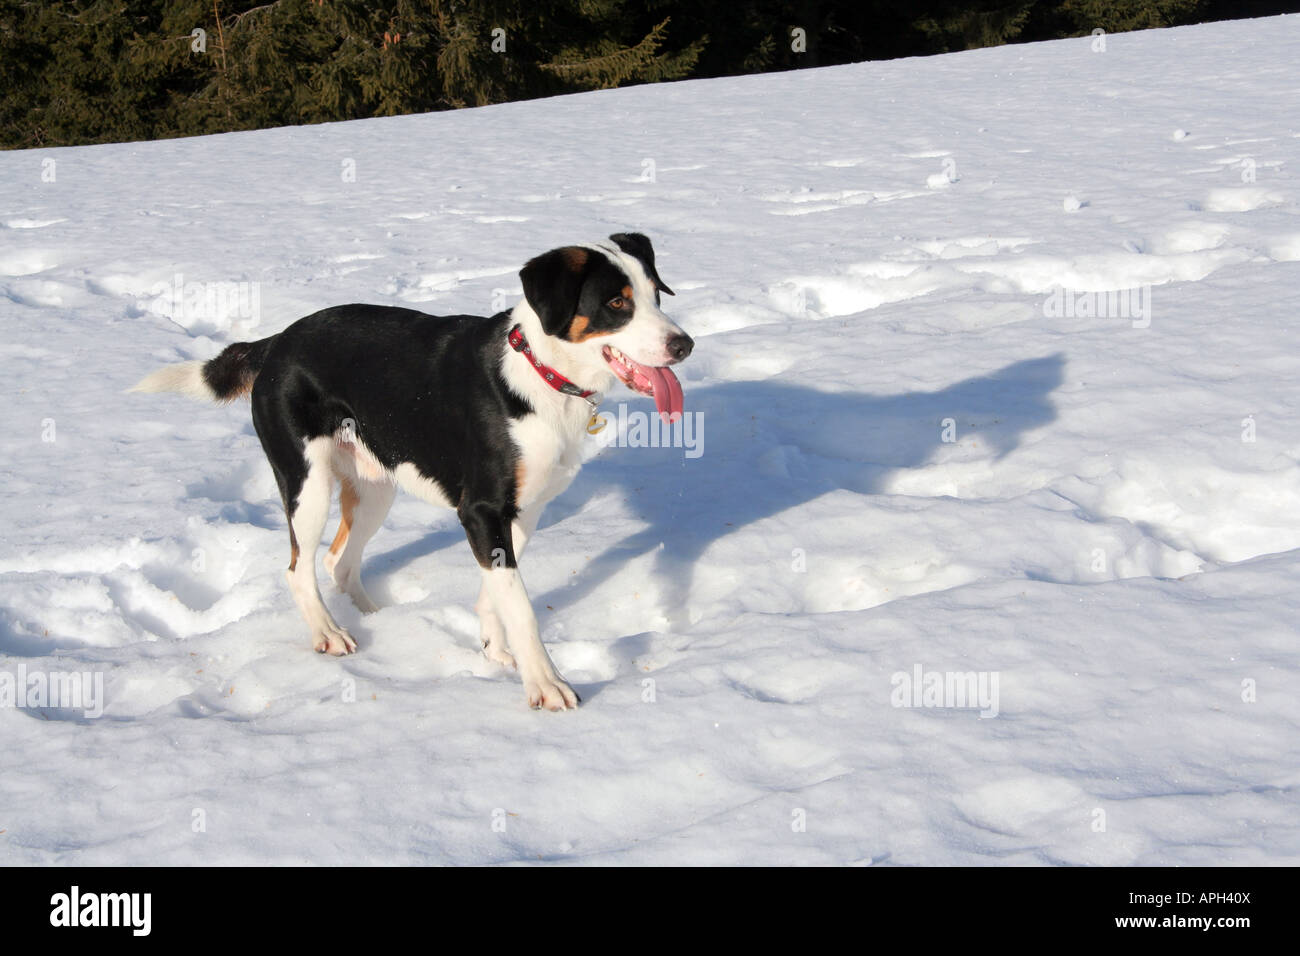 Beagle dog in winter snow waiting to play Bavaria Germany Europe Stock Photo